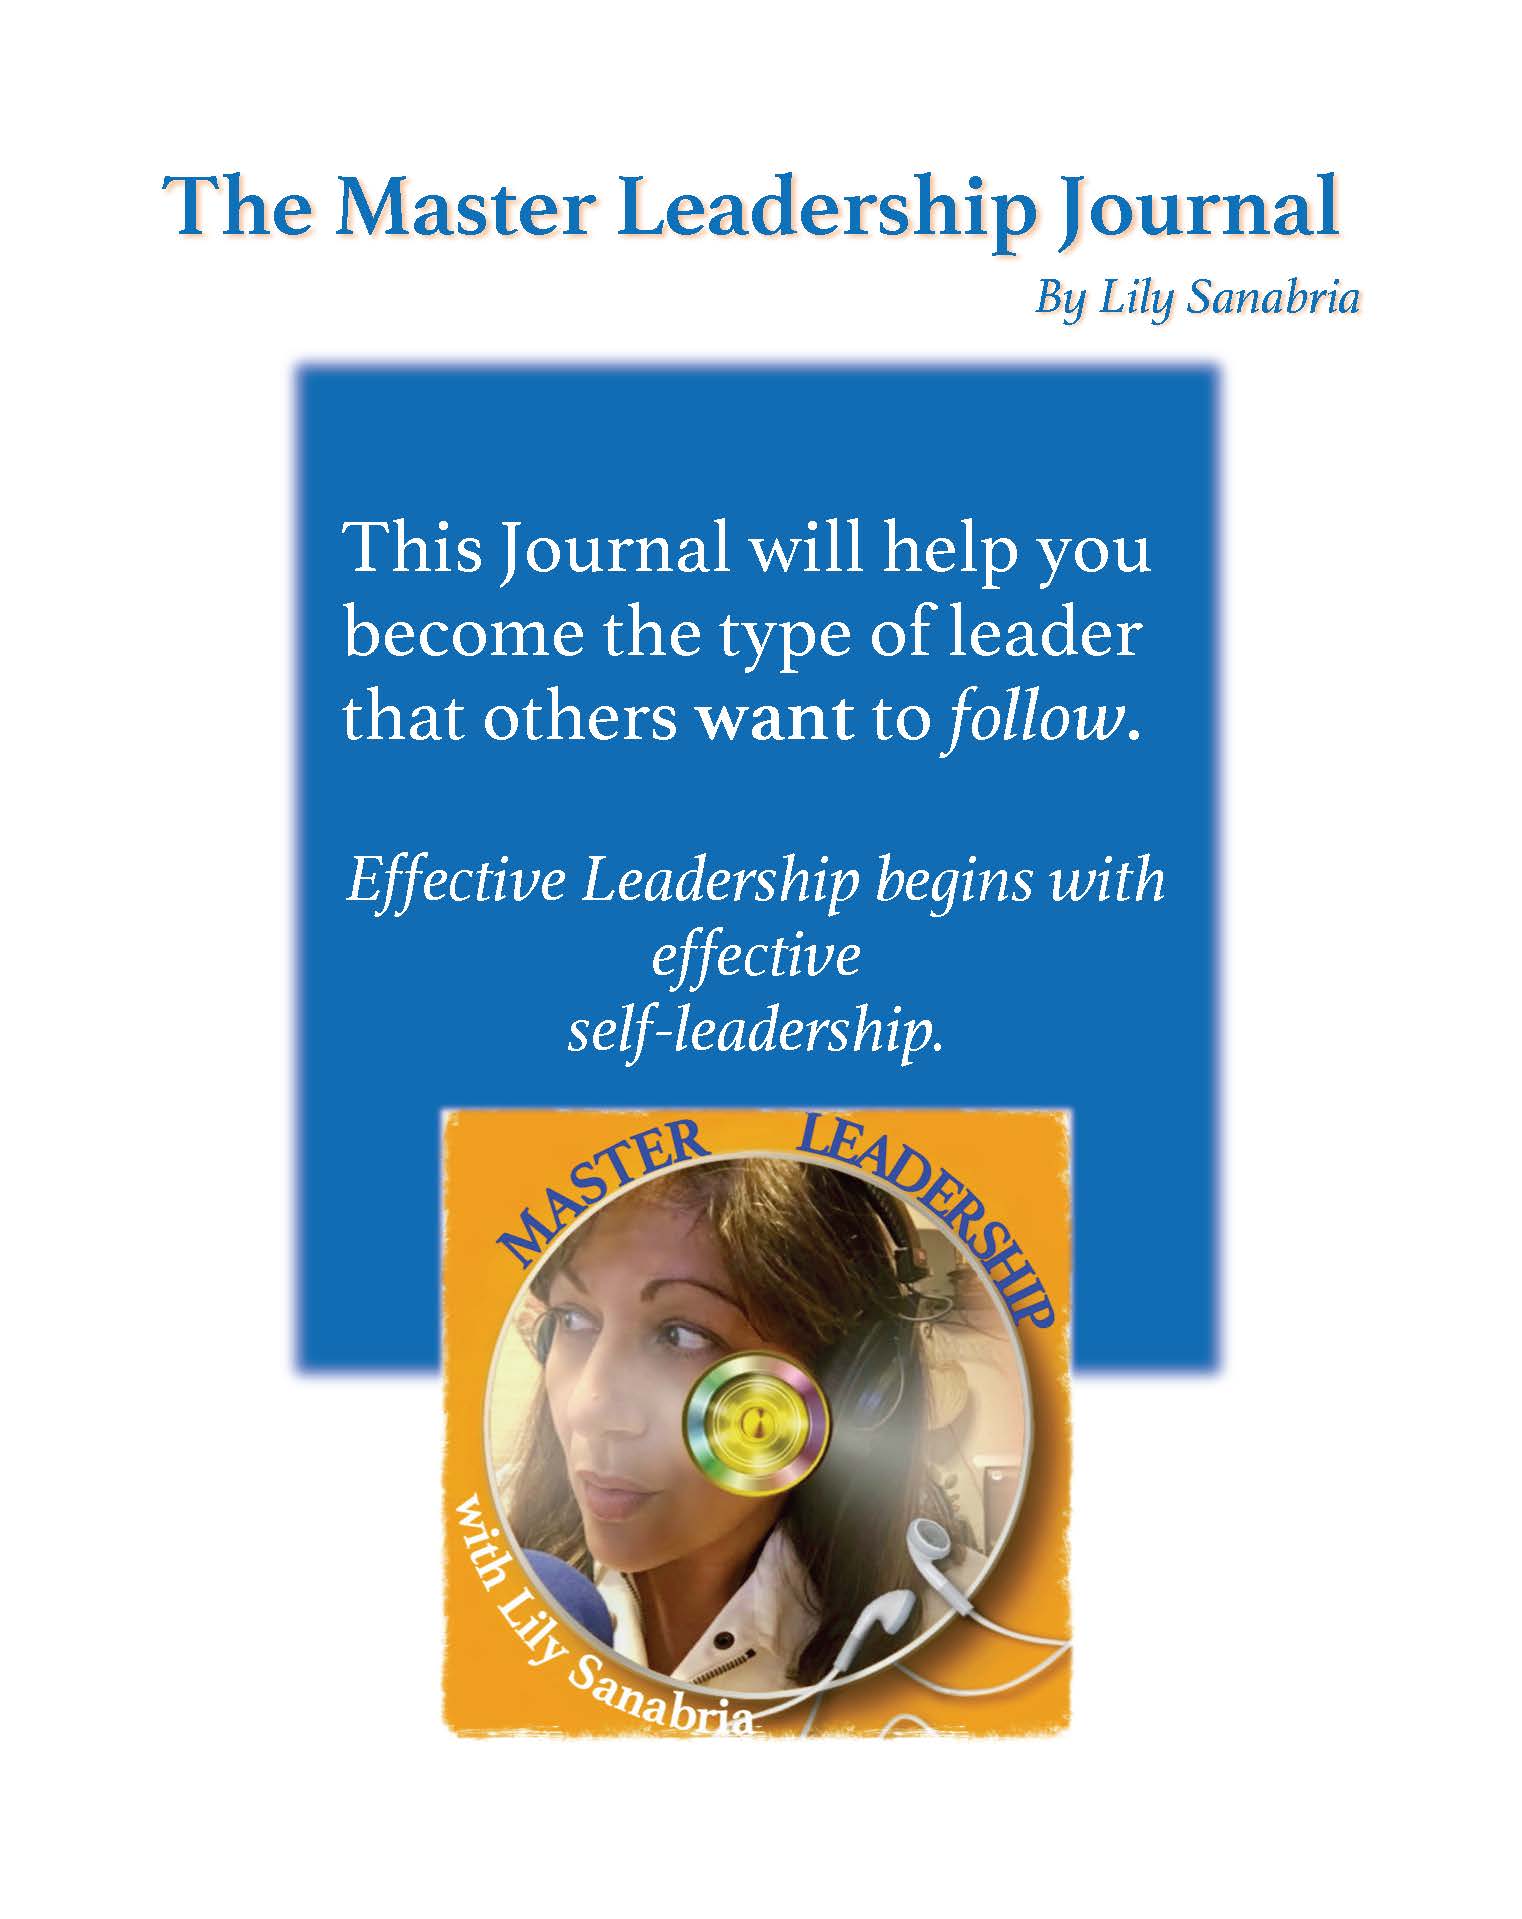 research journal on leadership style